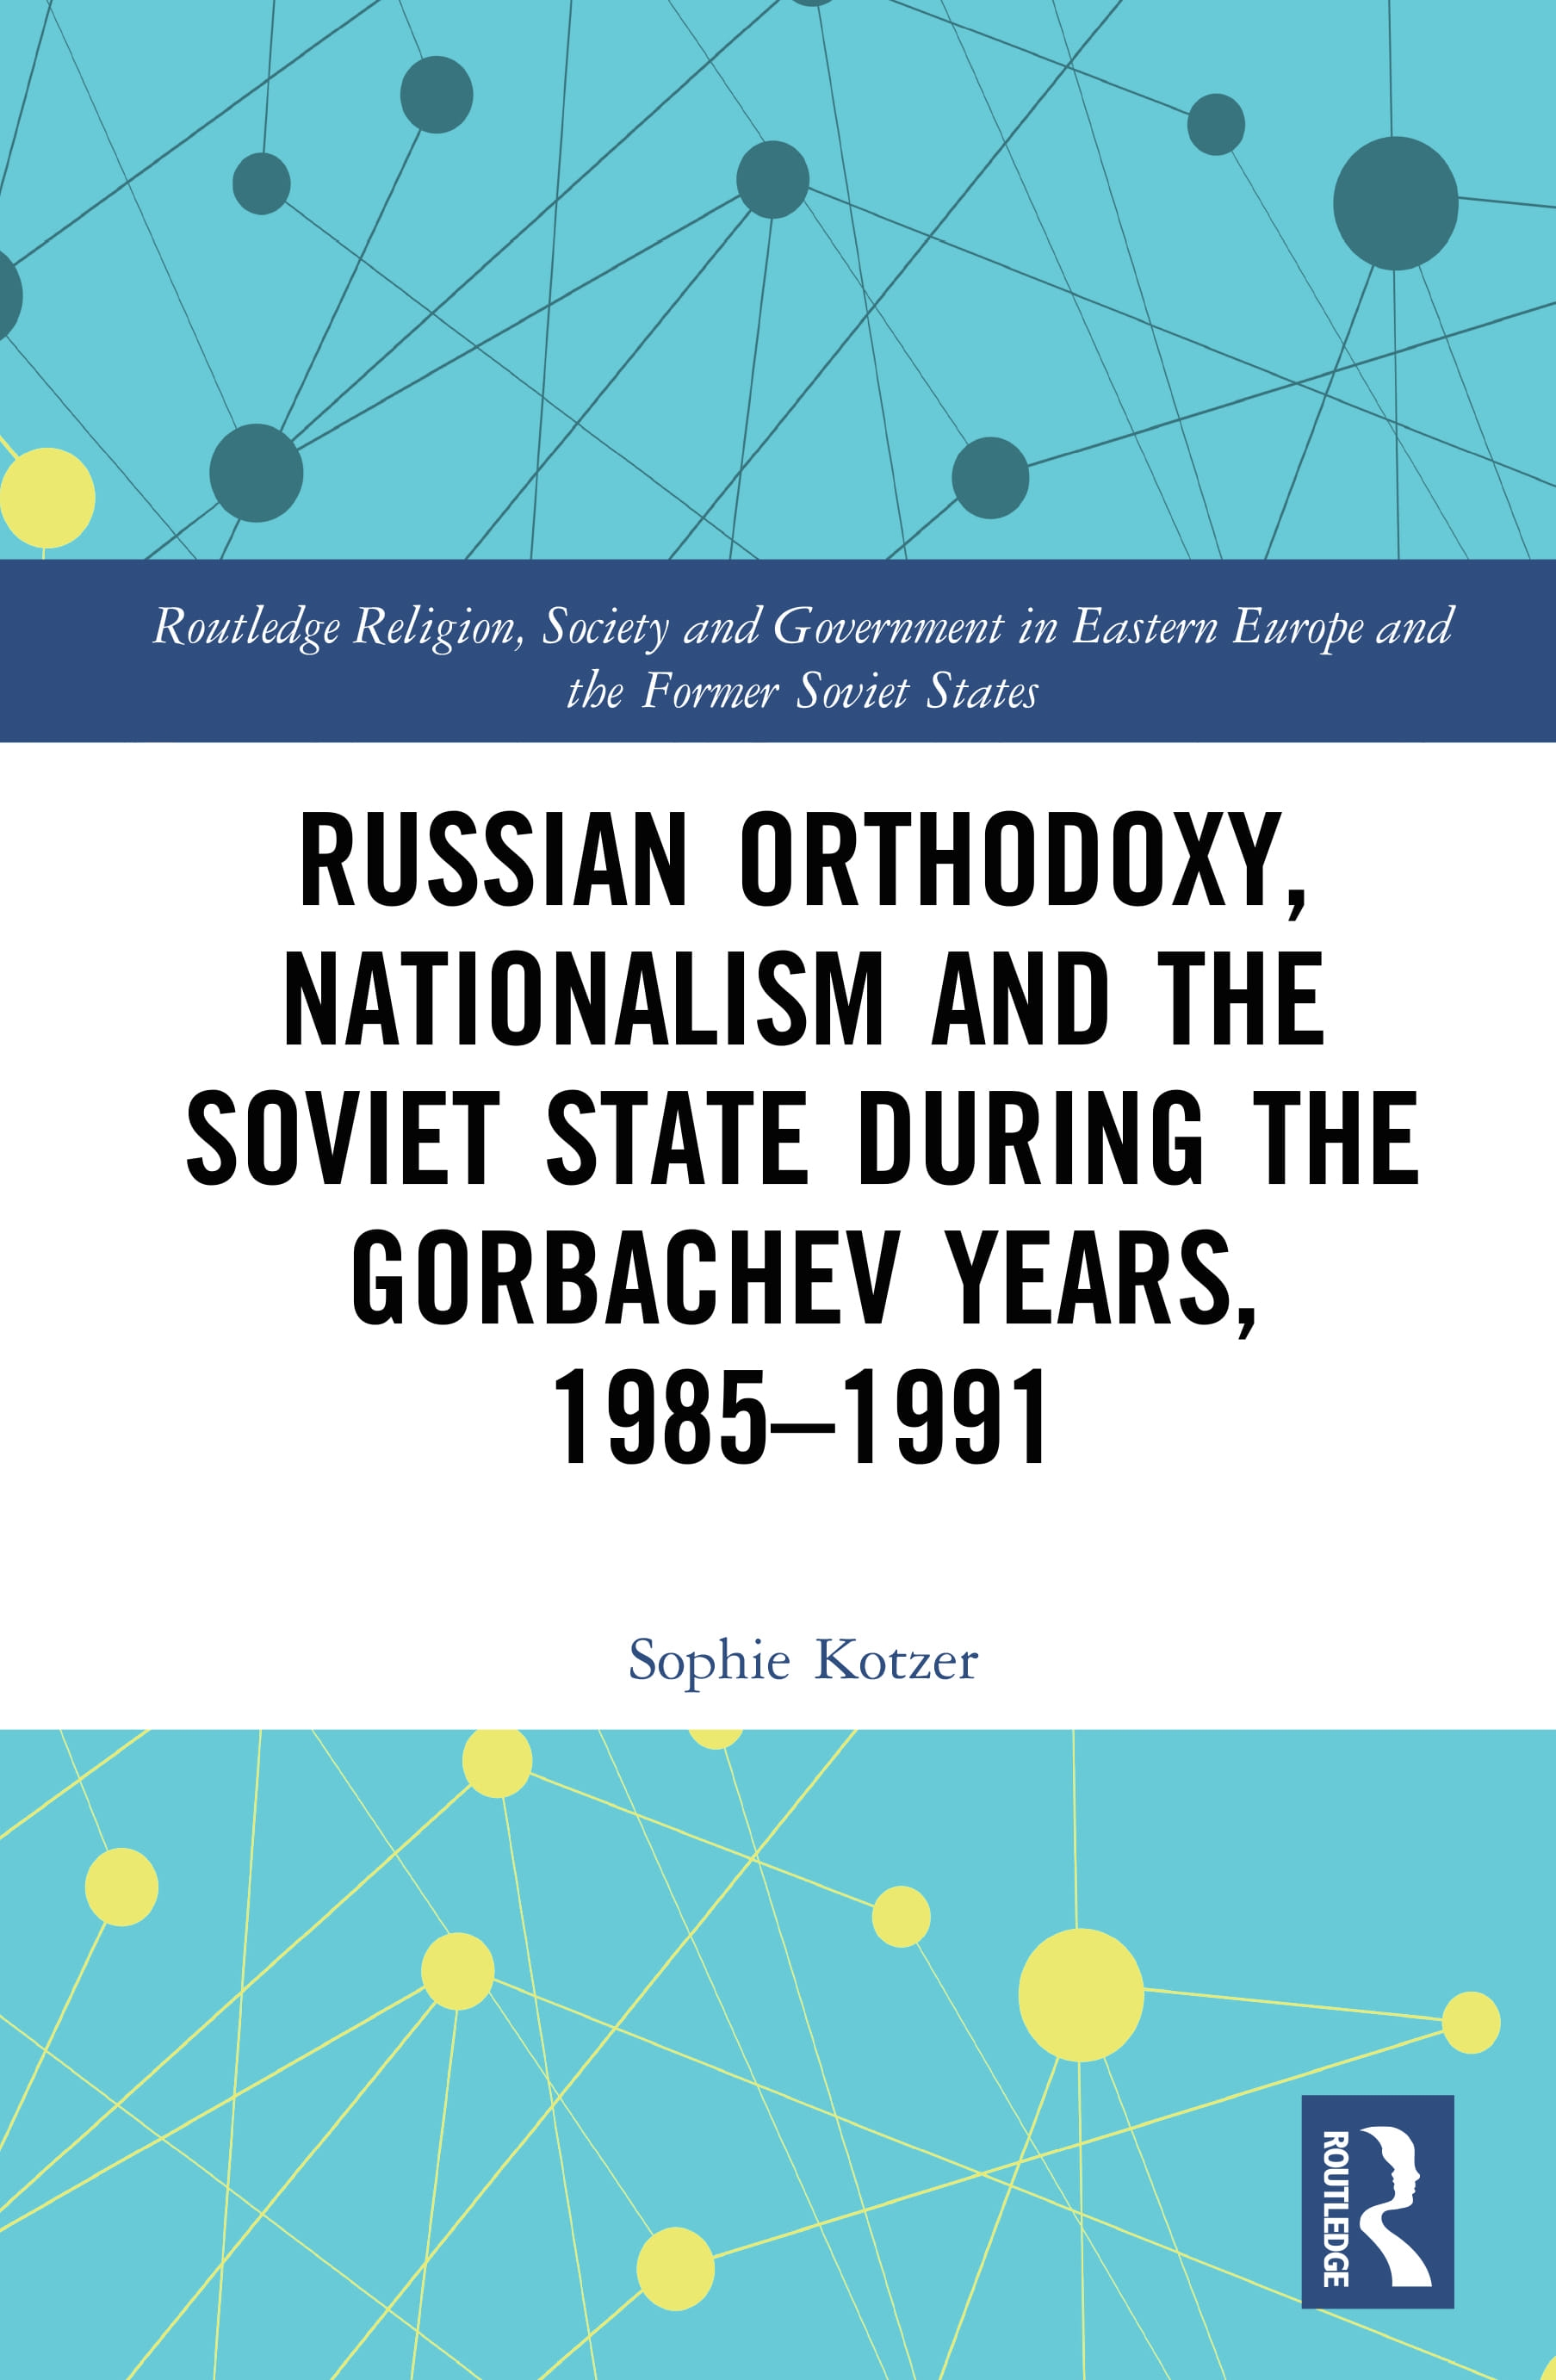 Russian Orthodoxy, Nationalism and the Soviet State During the Gorbachev Years, 1985-1991